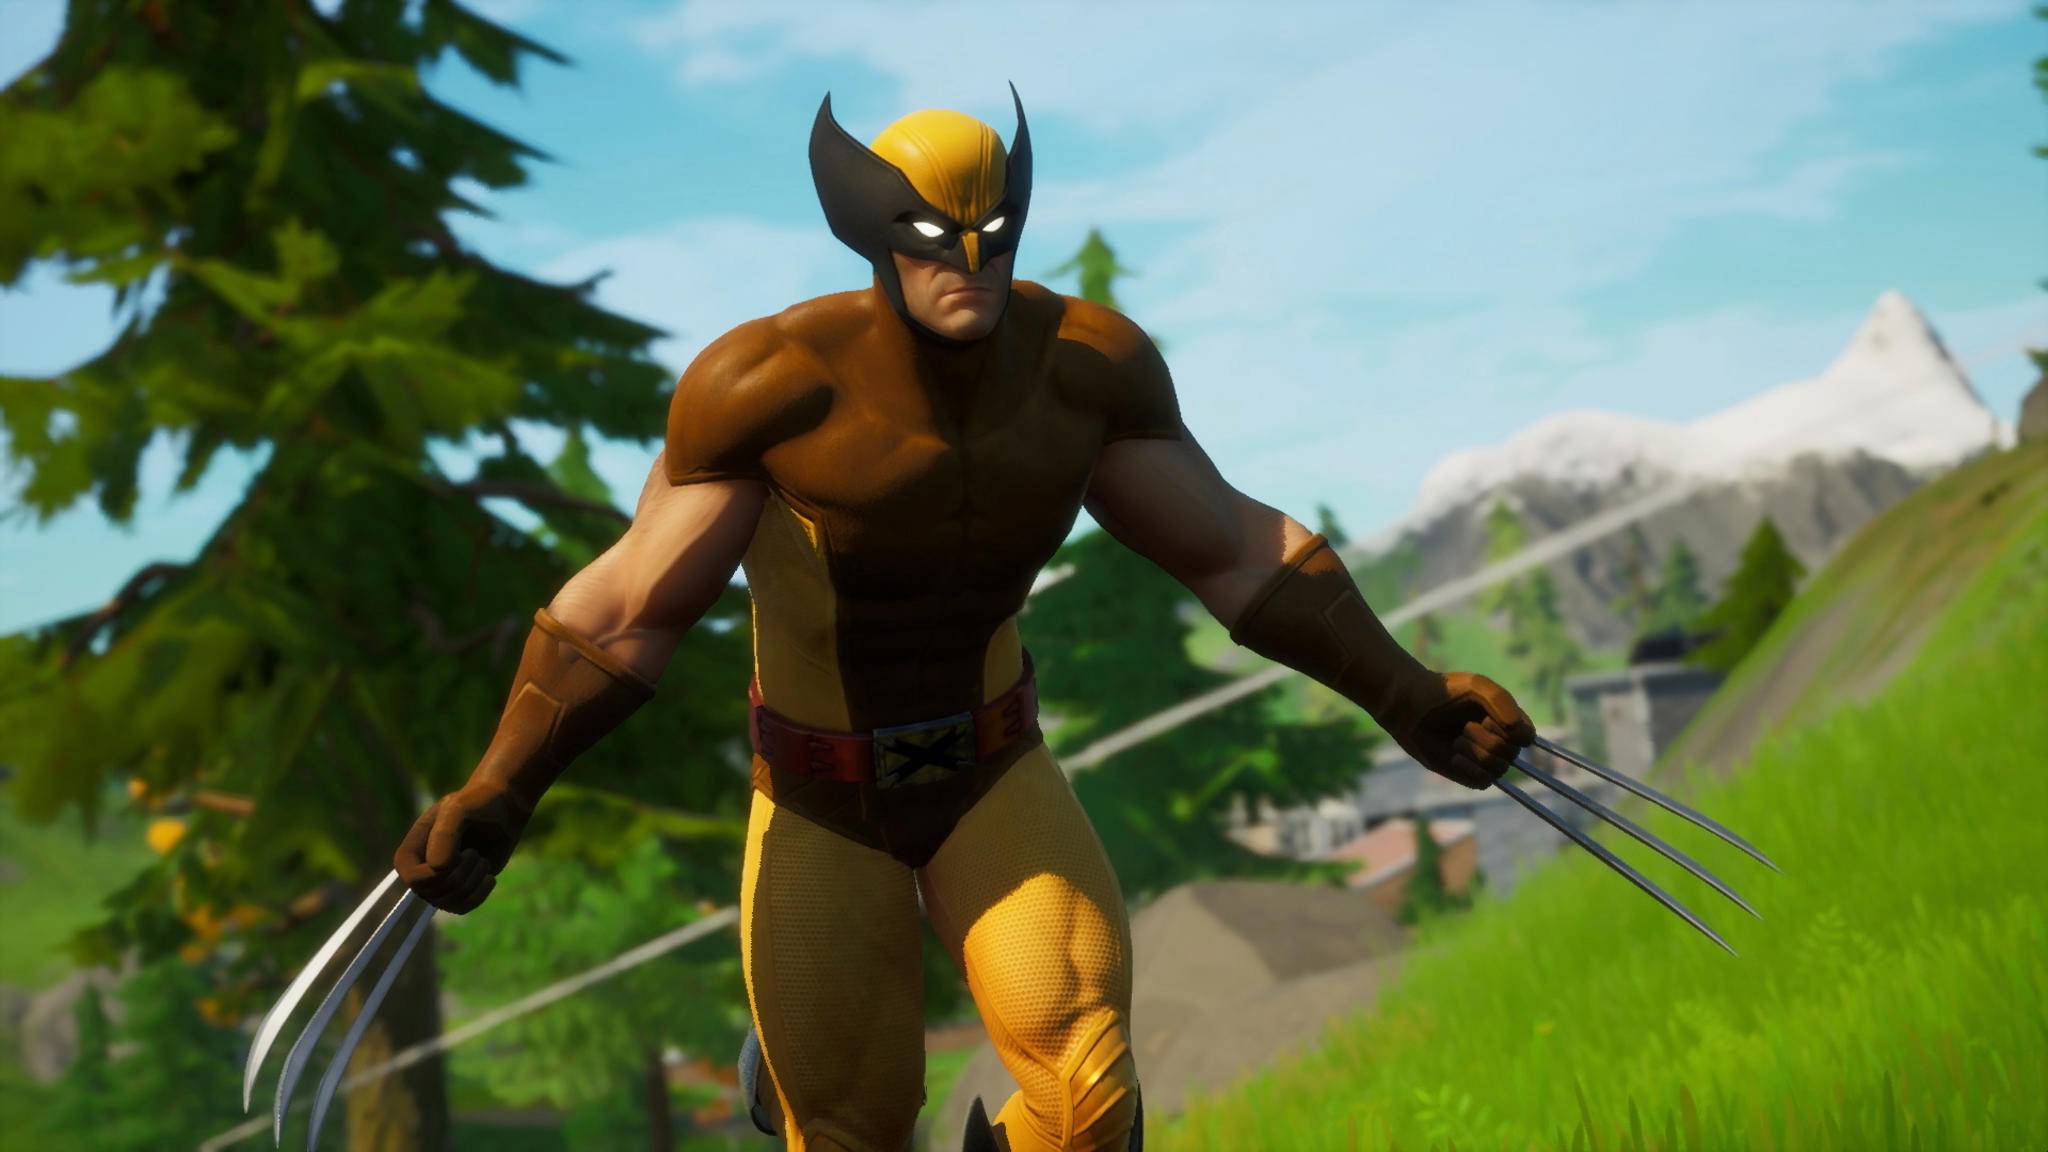 Wolverine will be roaming the Season 4 map as a Fortnite boss after the v14.20 update.